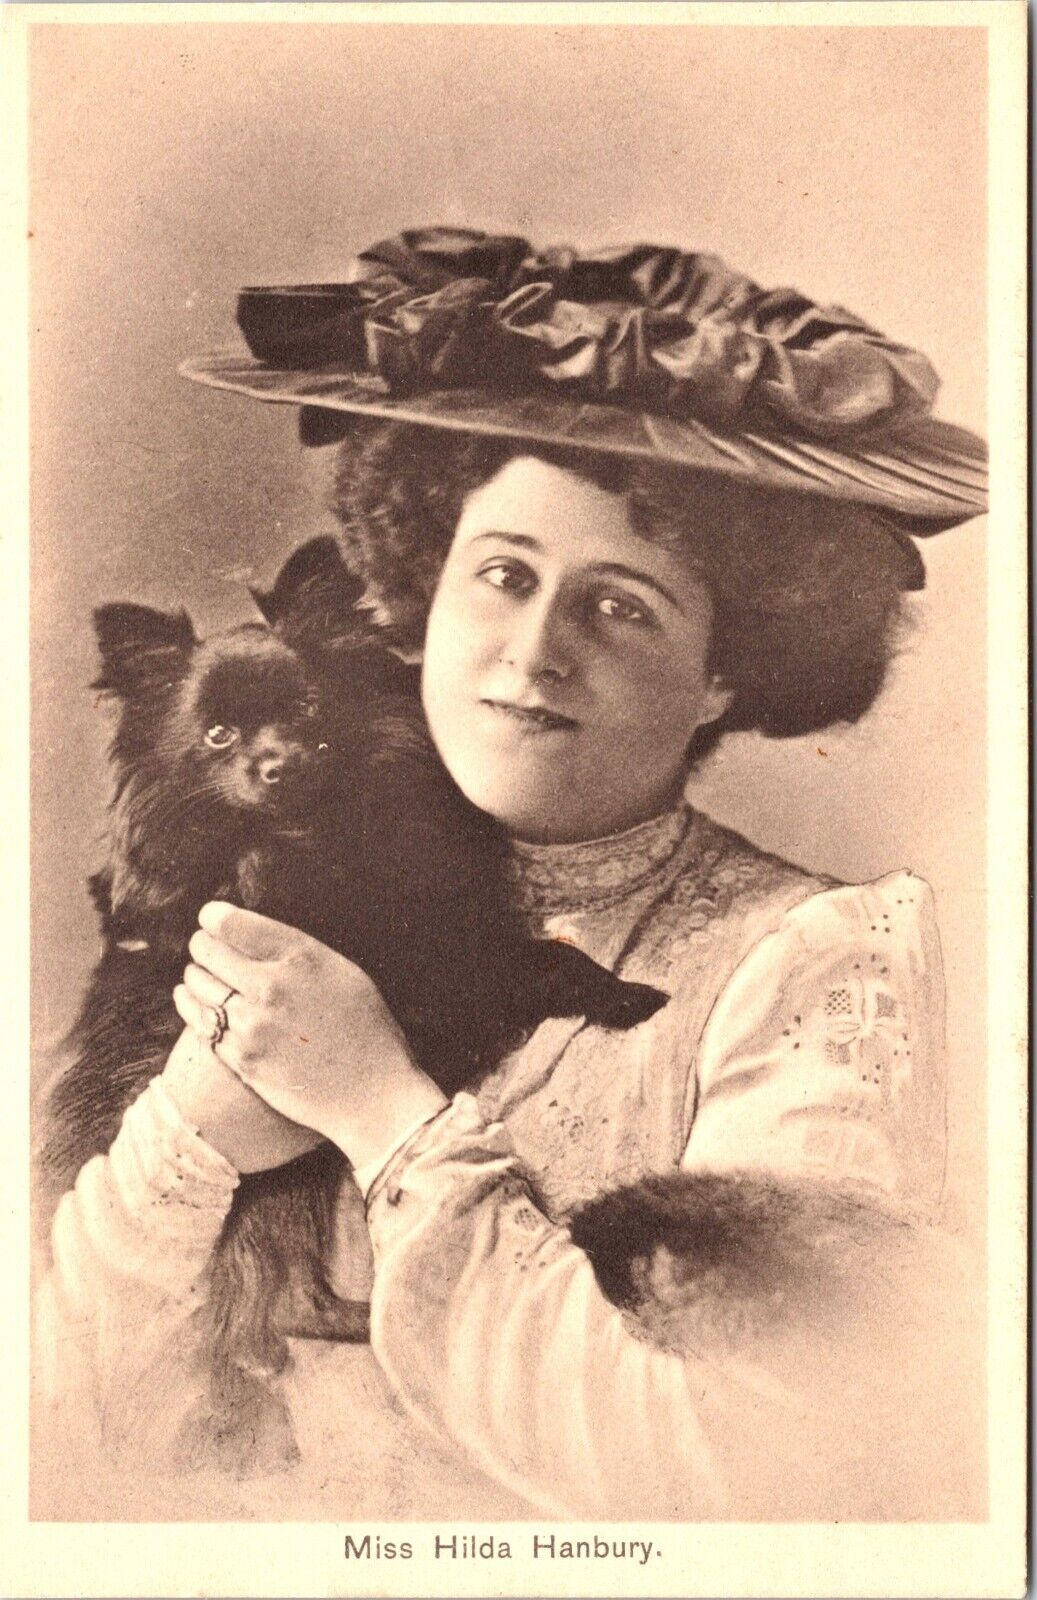 HILDA HANBURY AND HER CUTE DOG  :  BRITISH STAGE ACTRESS : STAGE BEAUTY : RPPC